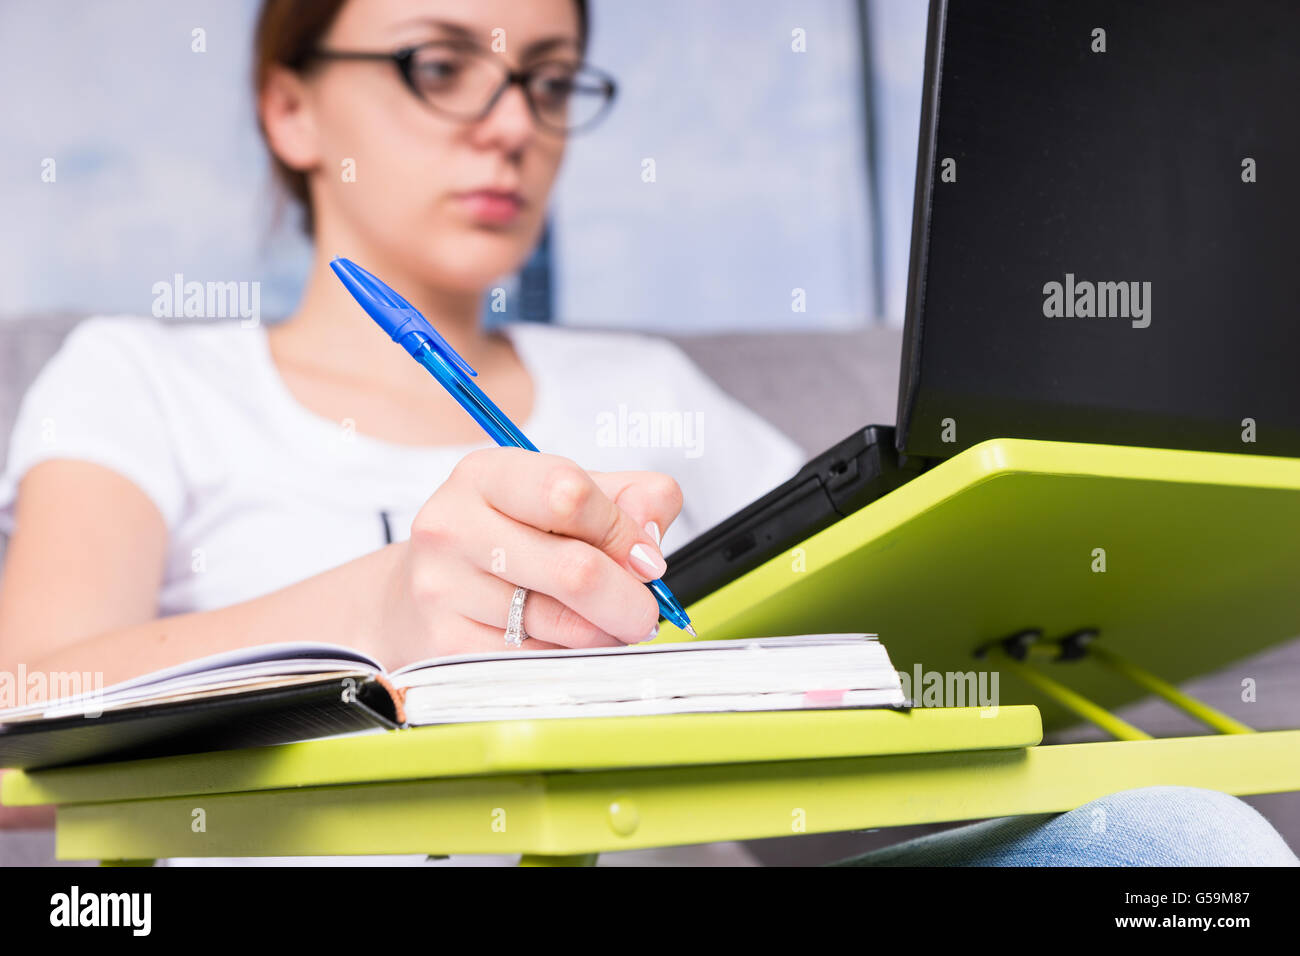 Close up of hand of a young woman who working on a laptop doing her business from home holding a pen as she reads information on the screen. Stock Photo